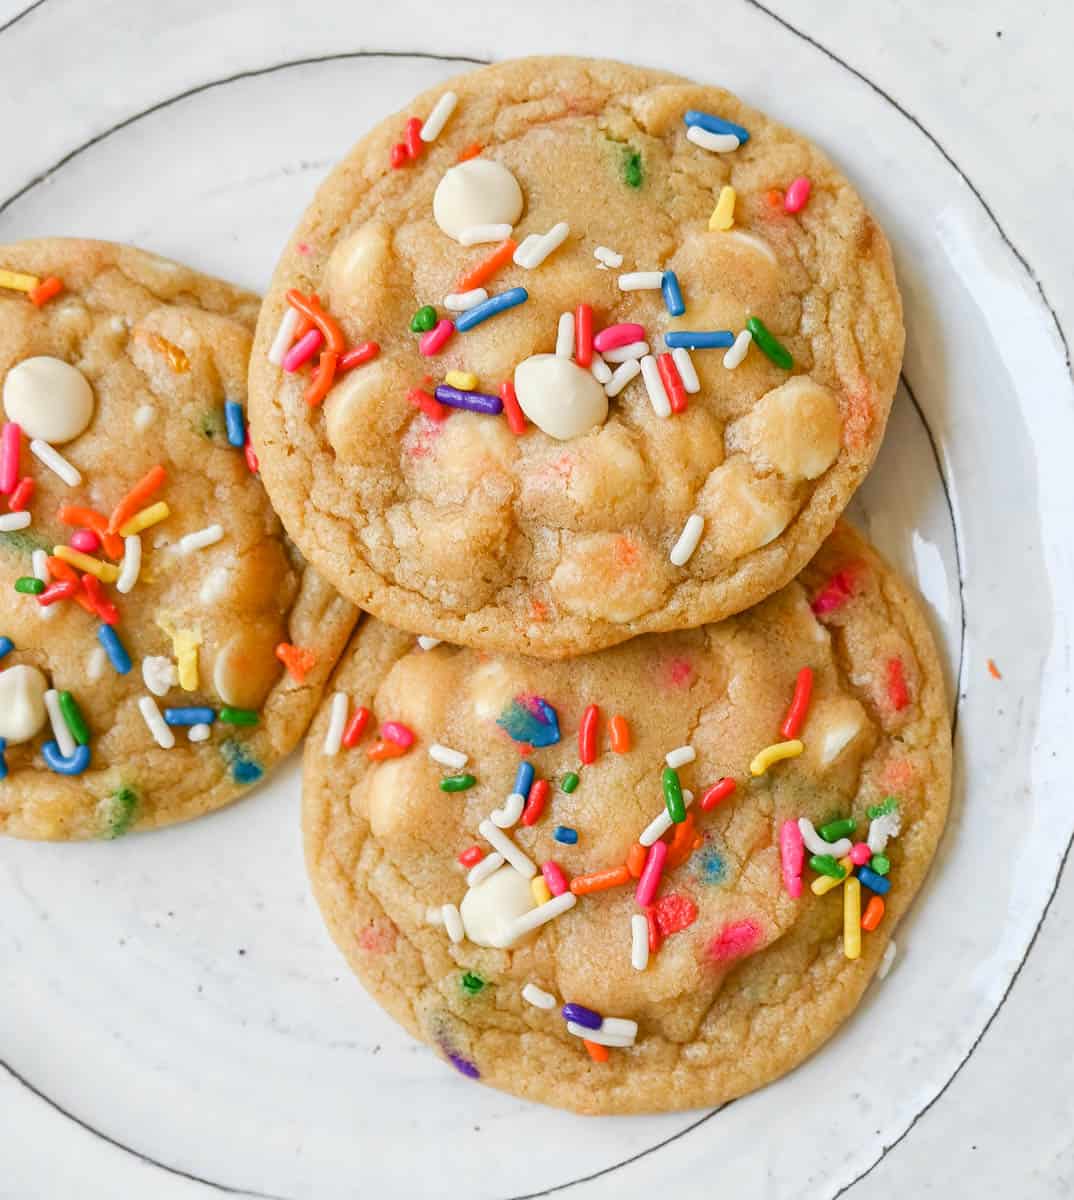 Soft, chewy sugar cookies filled with sprinkles and white chocolate. This festive funfetti cookie recipe has the perfect chewy center with buttery crisp edges filled with rainbow sprinkles. 